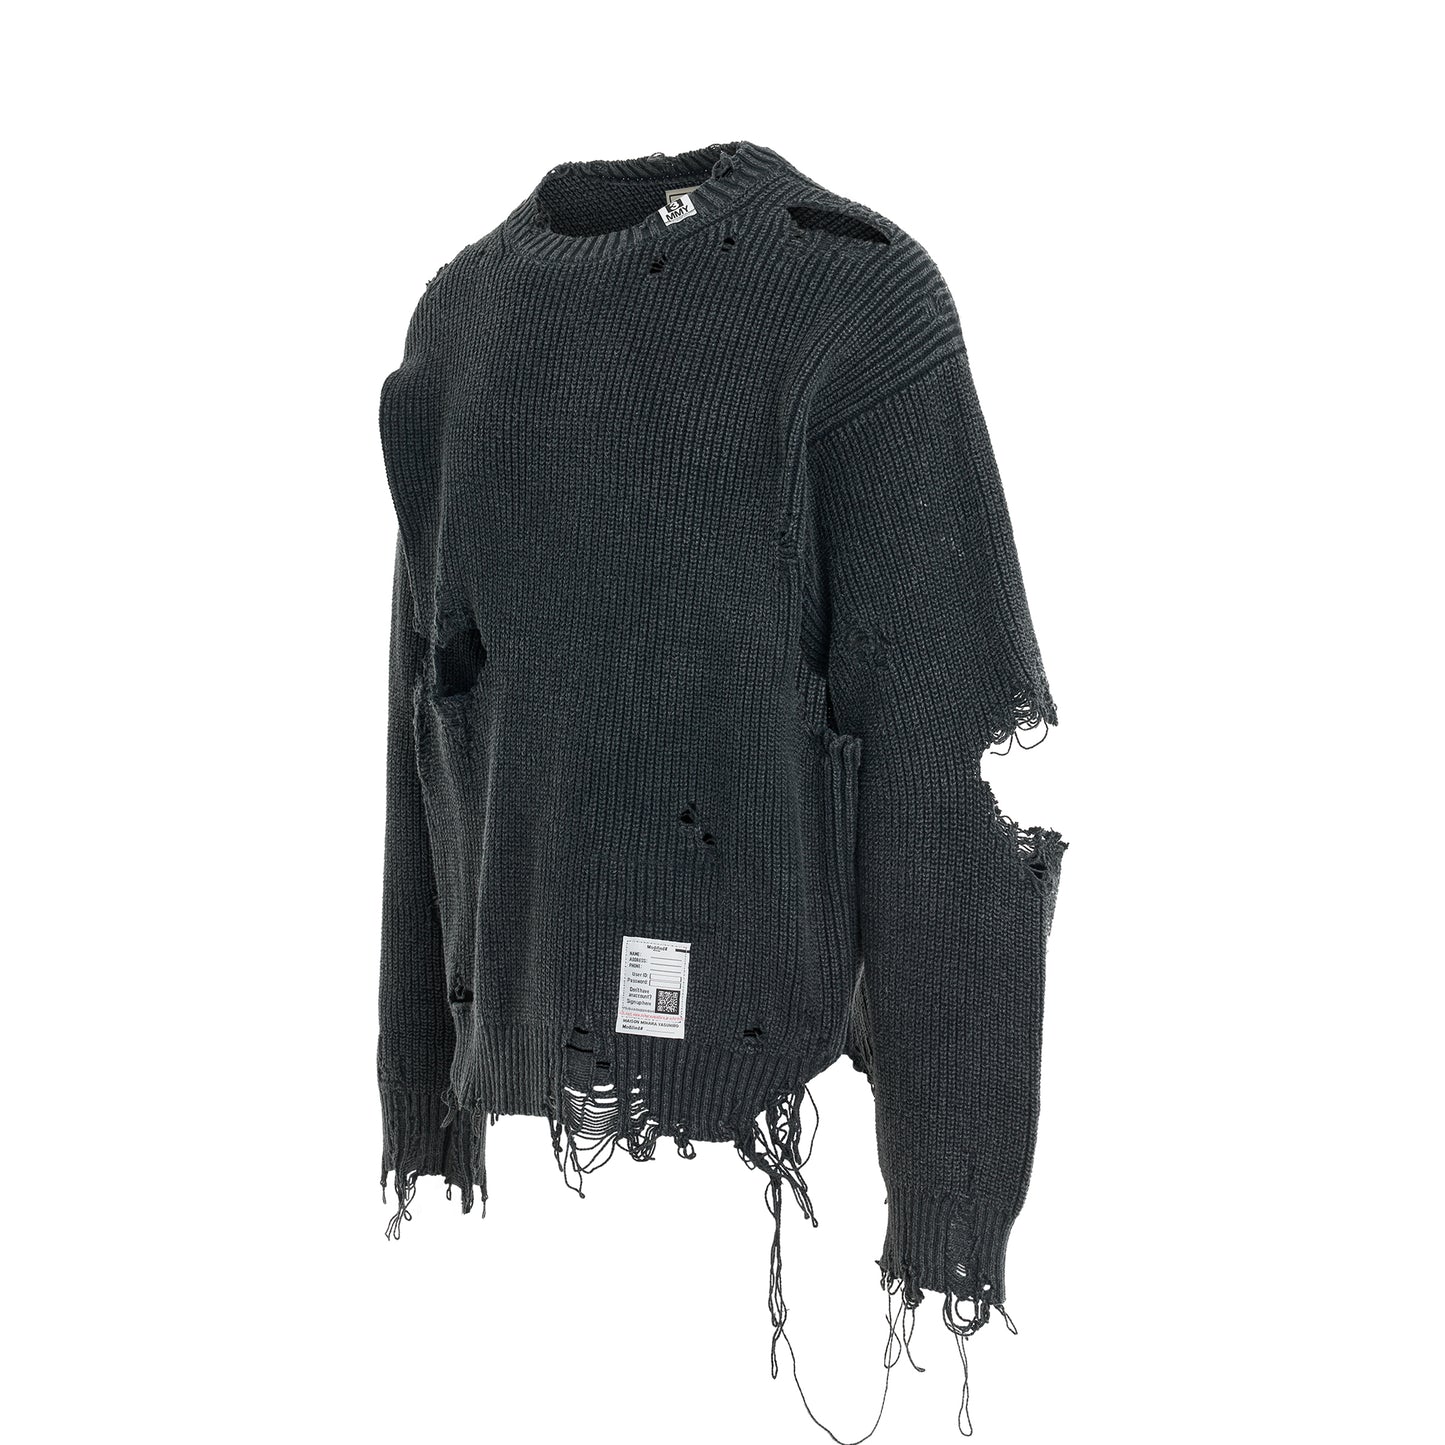 Bleached Knit Sweater in Black